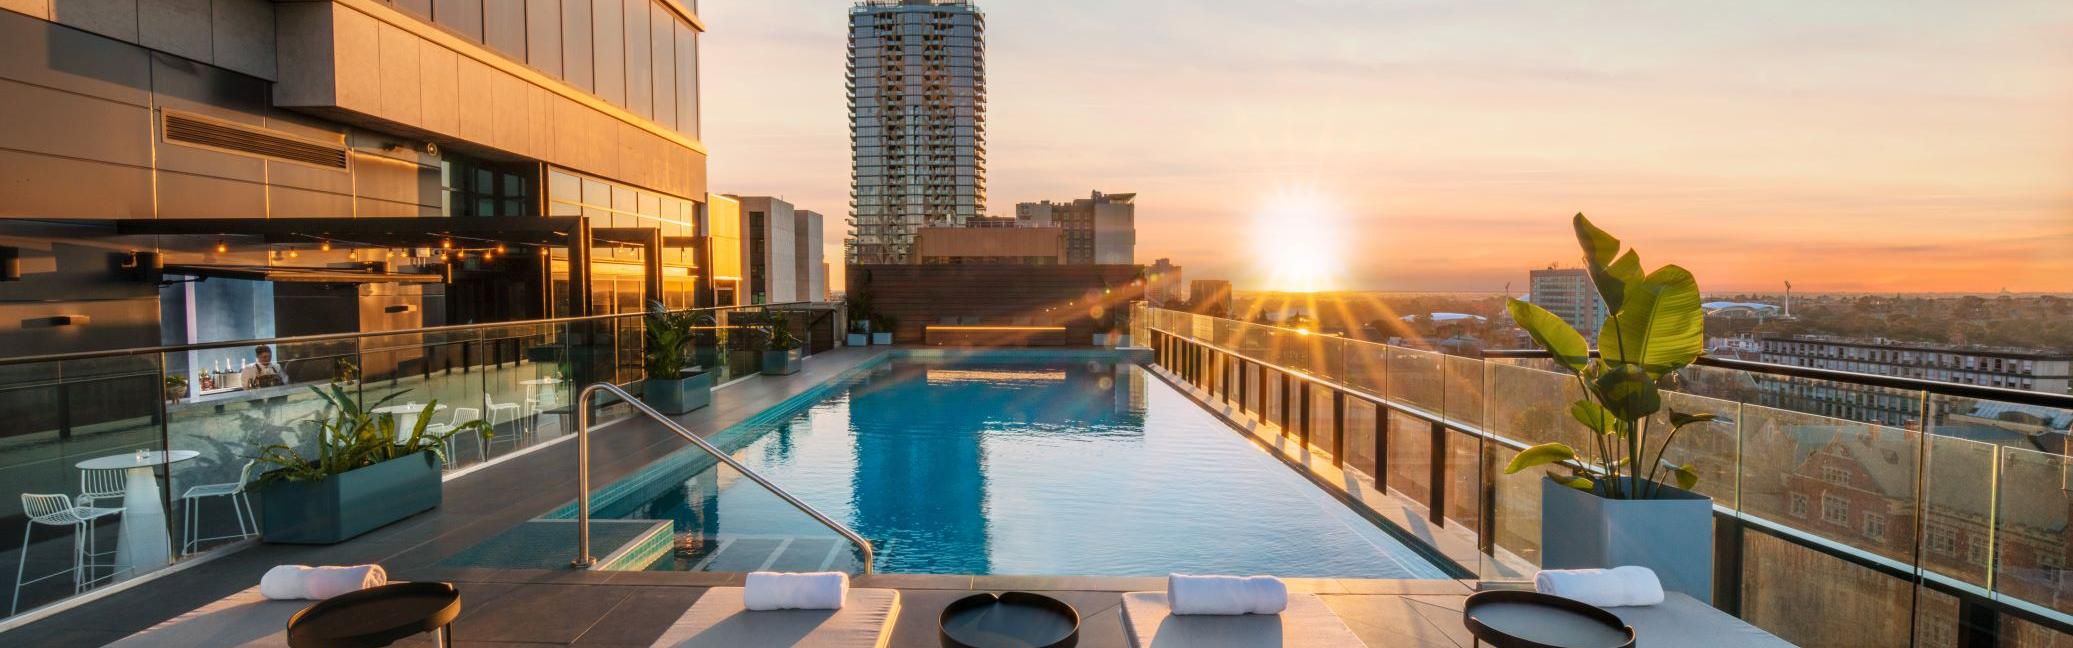 Take a swim in our heated pool on level 10 with stunning views 